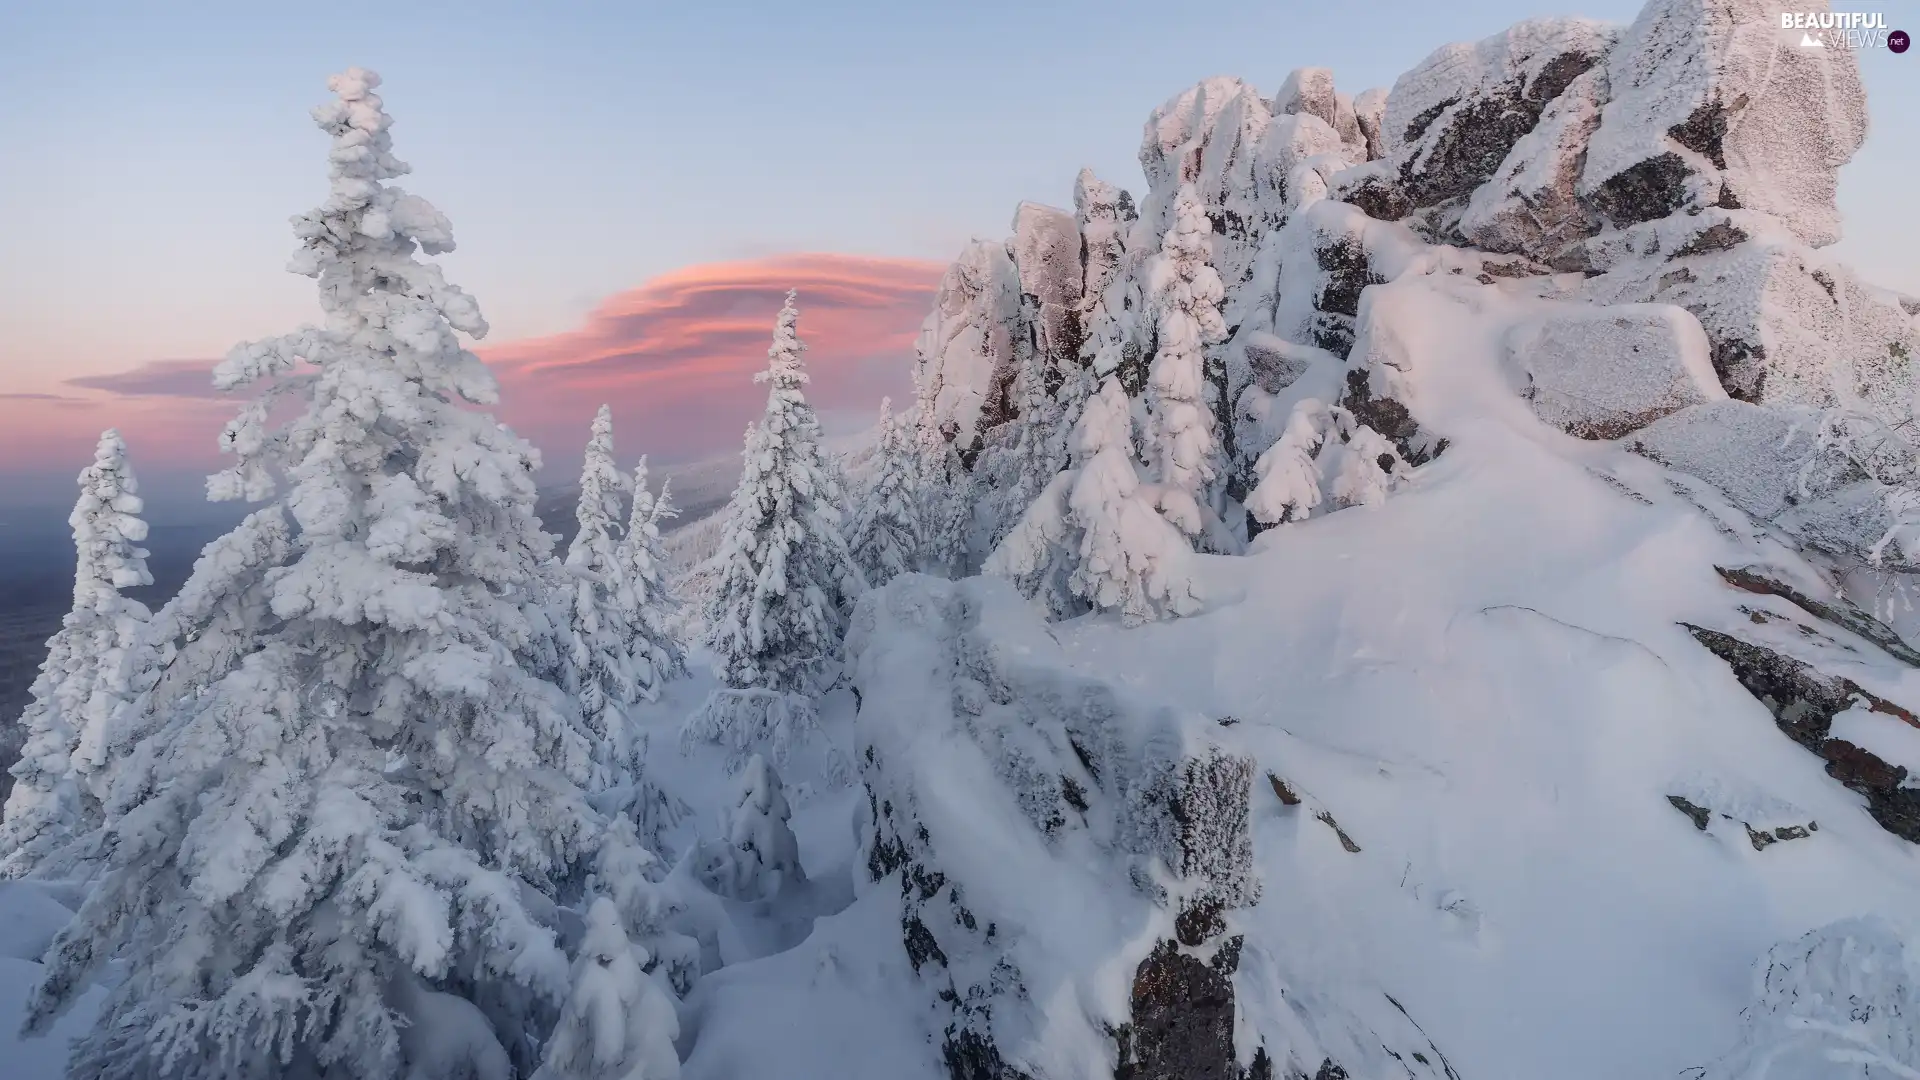 viewes, Snowy, Pinkish, trees, winter, rocks, clouds